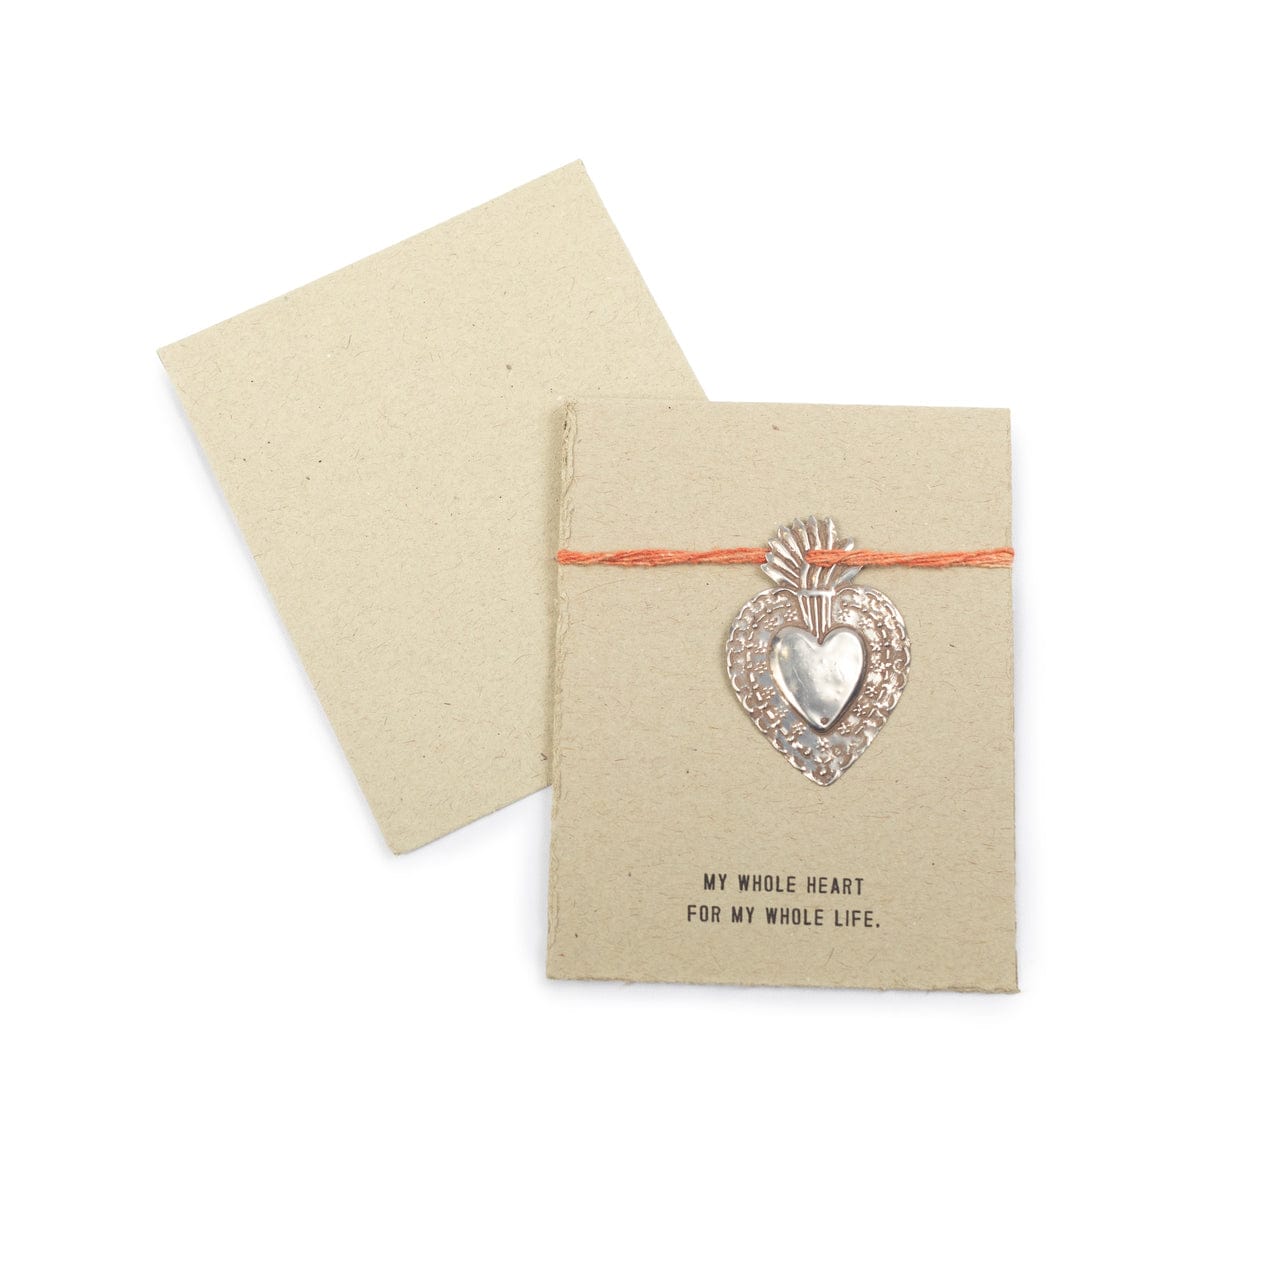 Milagro Heart Cards Sugarboo Designs Greeting Card whole heart